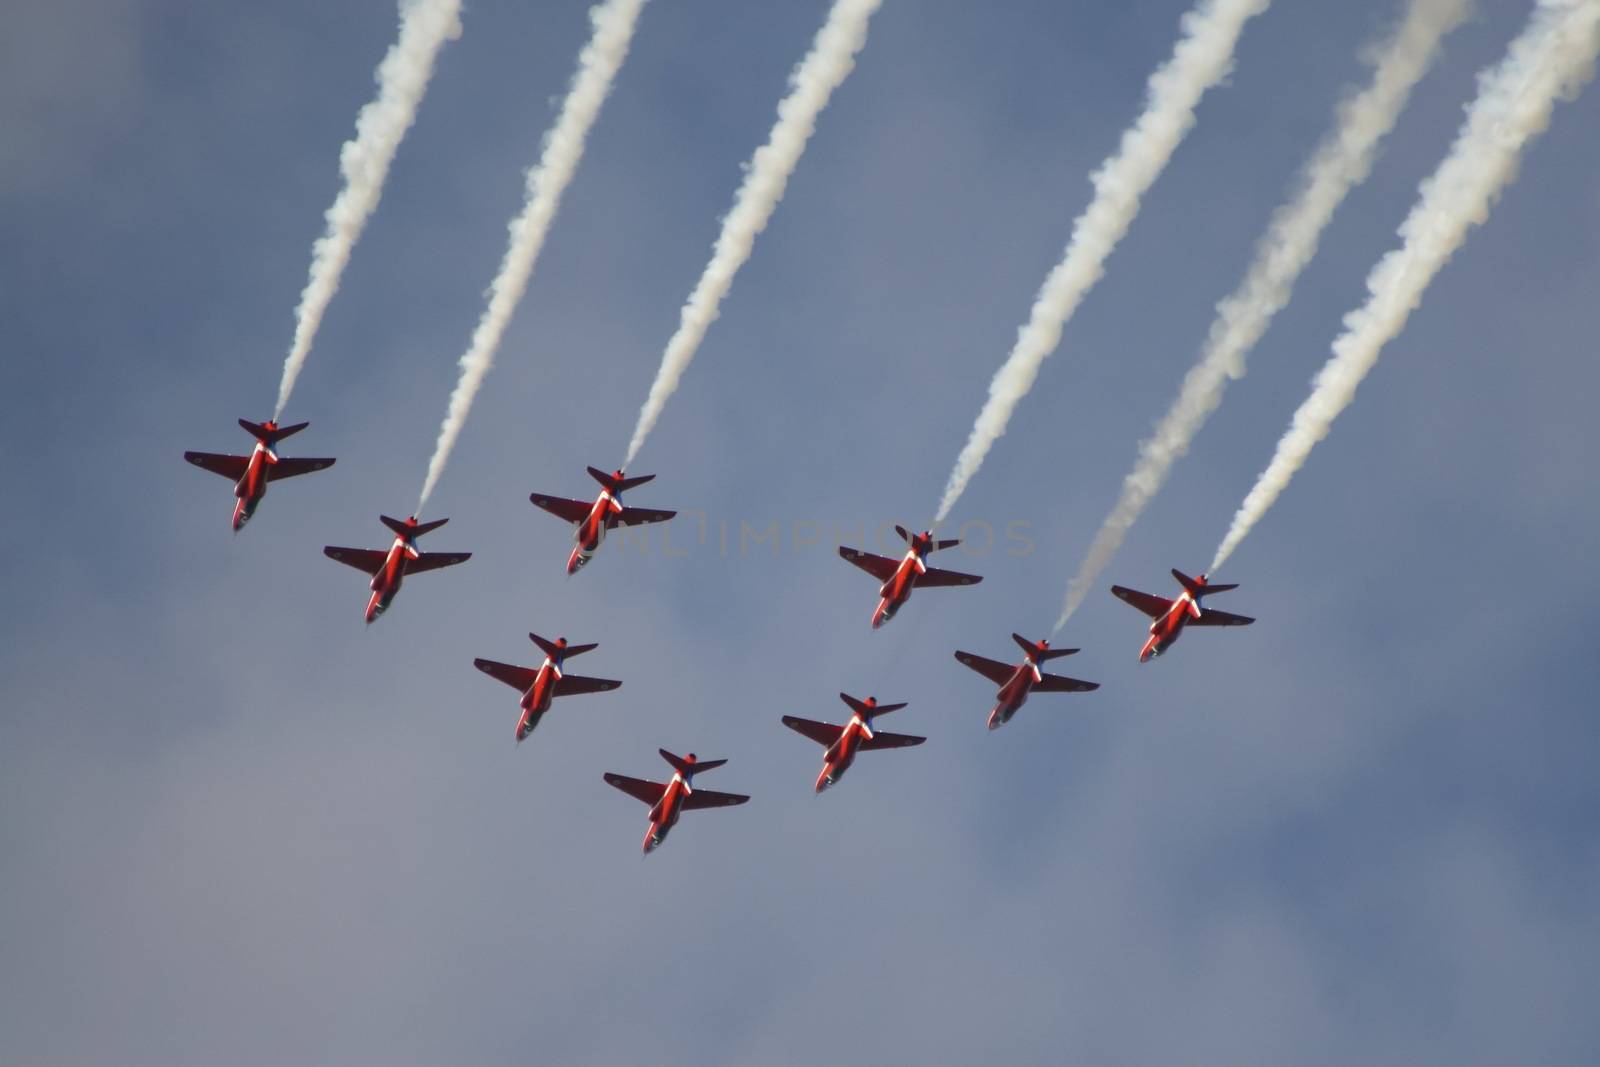 The royal air force red arrows air show flying in formation overhead in England.